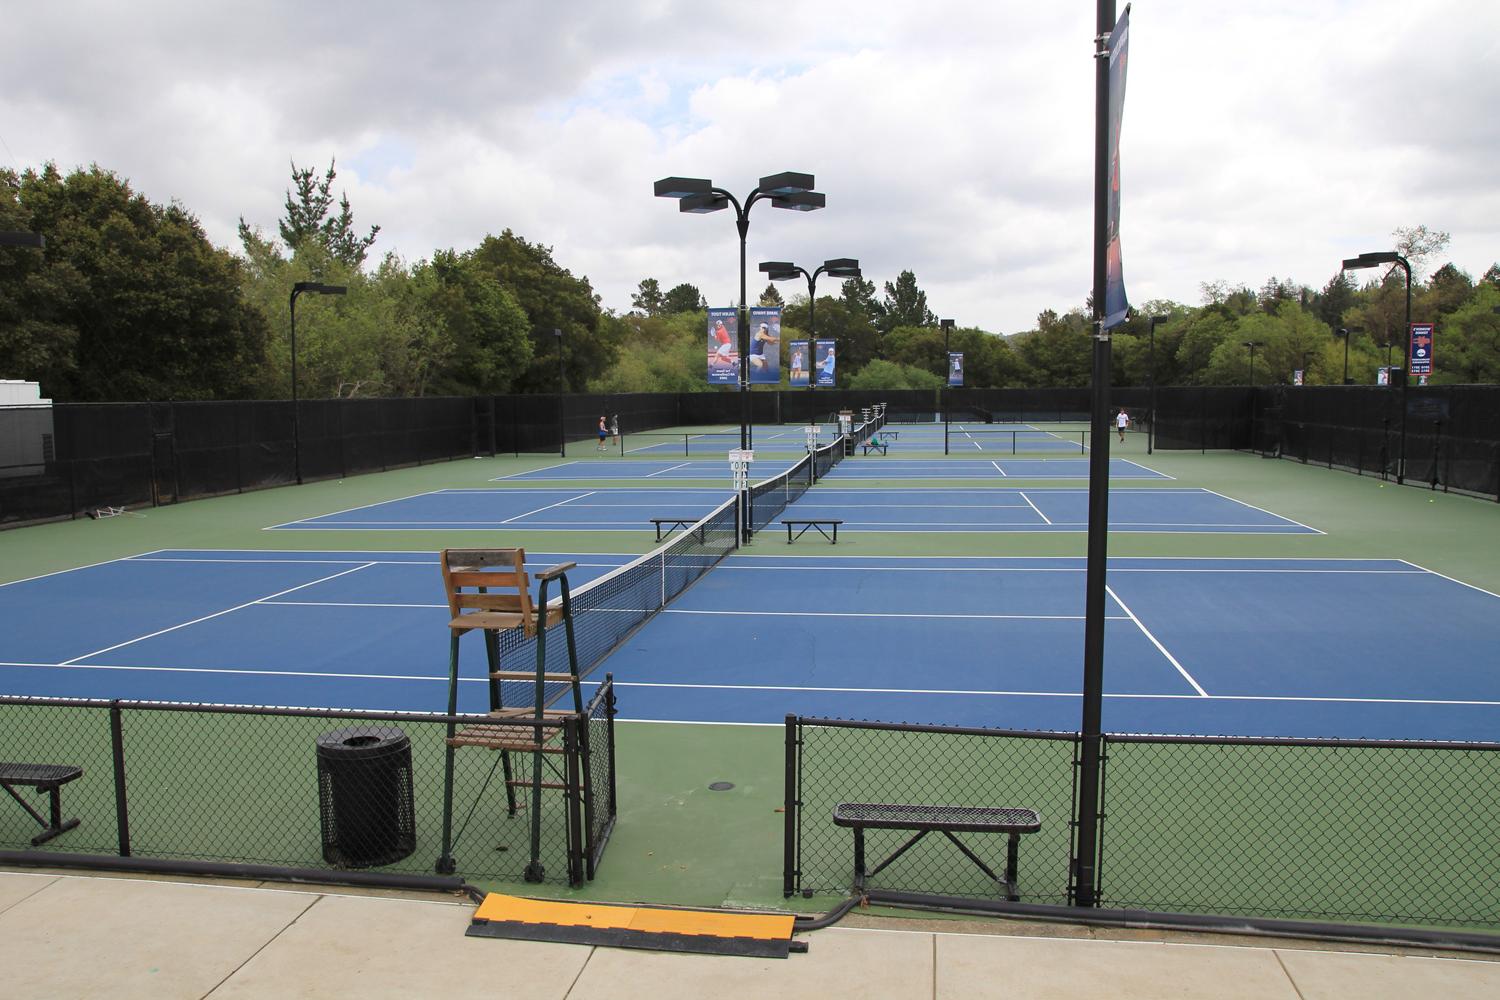 five outdoor tennis courts